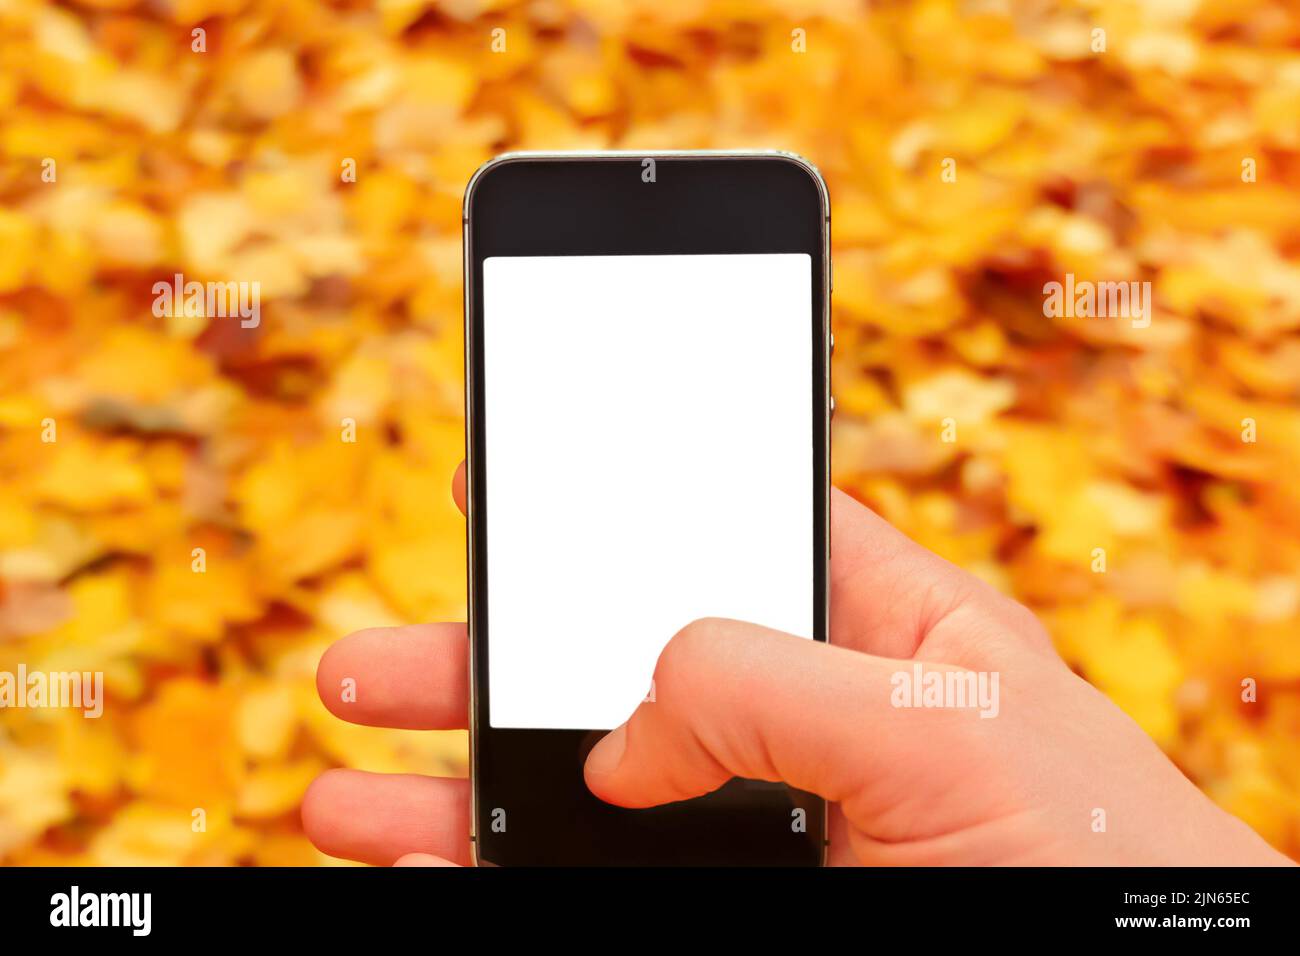 Blank. Fallen leaves autumn mobile phone mockup hand holding smartphone nature fall background leaves falling sale mobile mockup smartphone blank Stock Photo